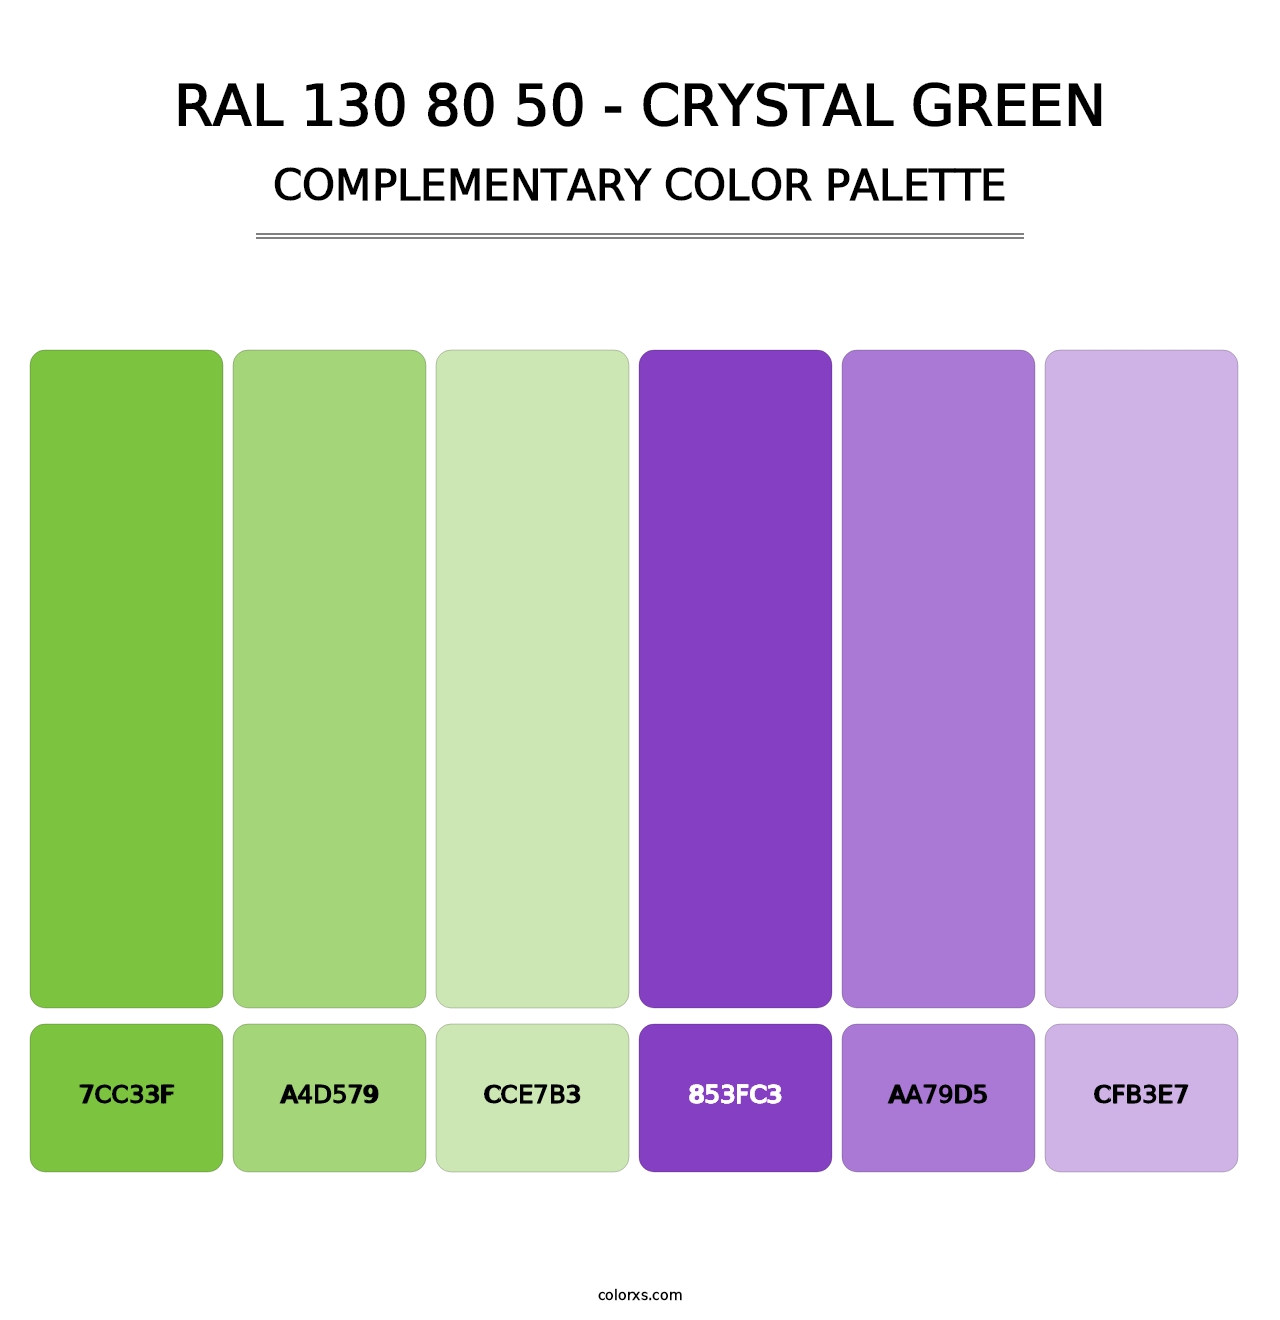 RAL 130 80 50 - Crystal Green - Complementary Color Palette